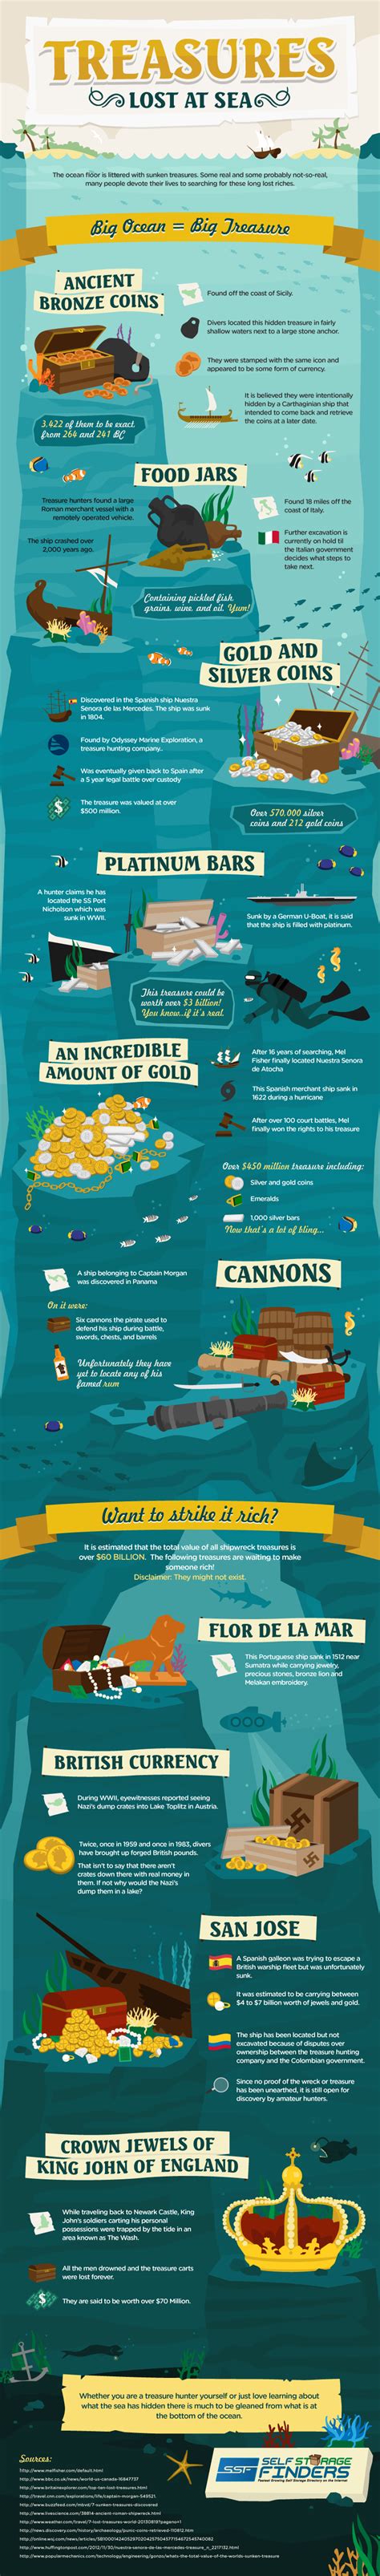 Treasures Lost At Sea Infographic